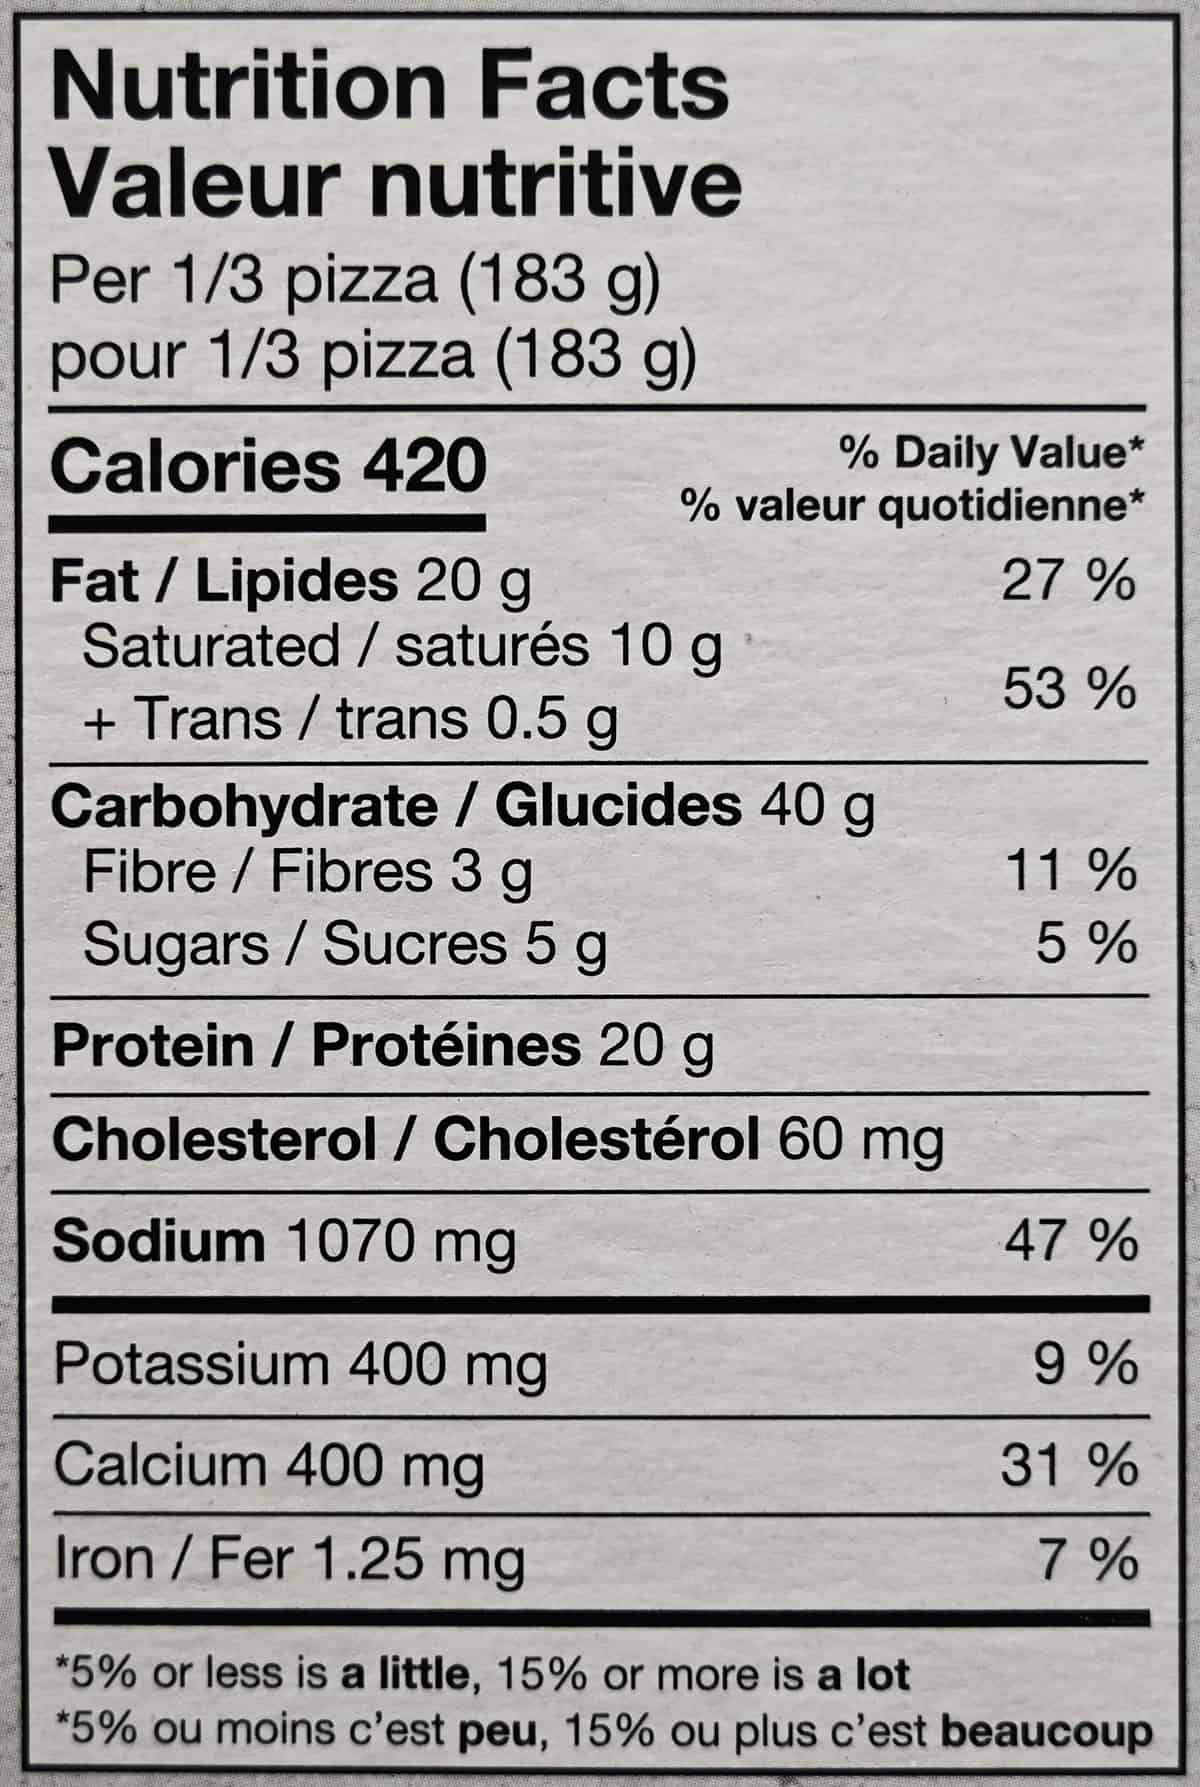 Image of the nutrition facts label from the box of pizza.